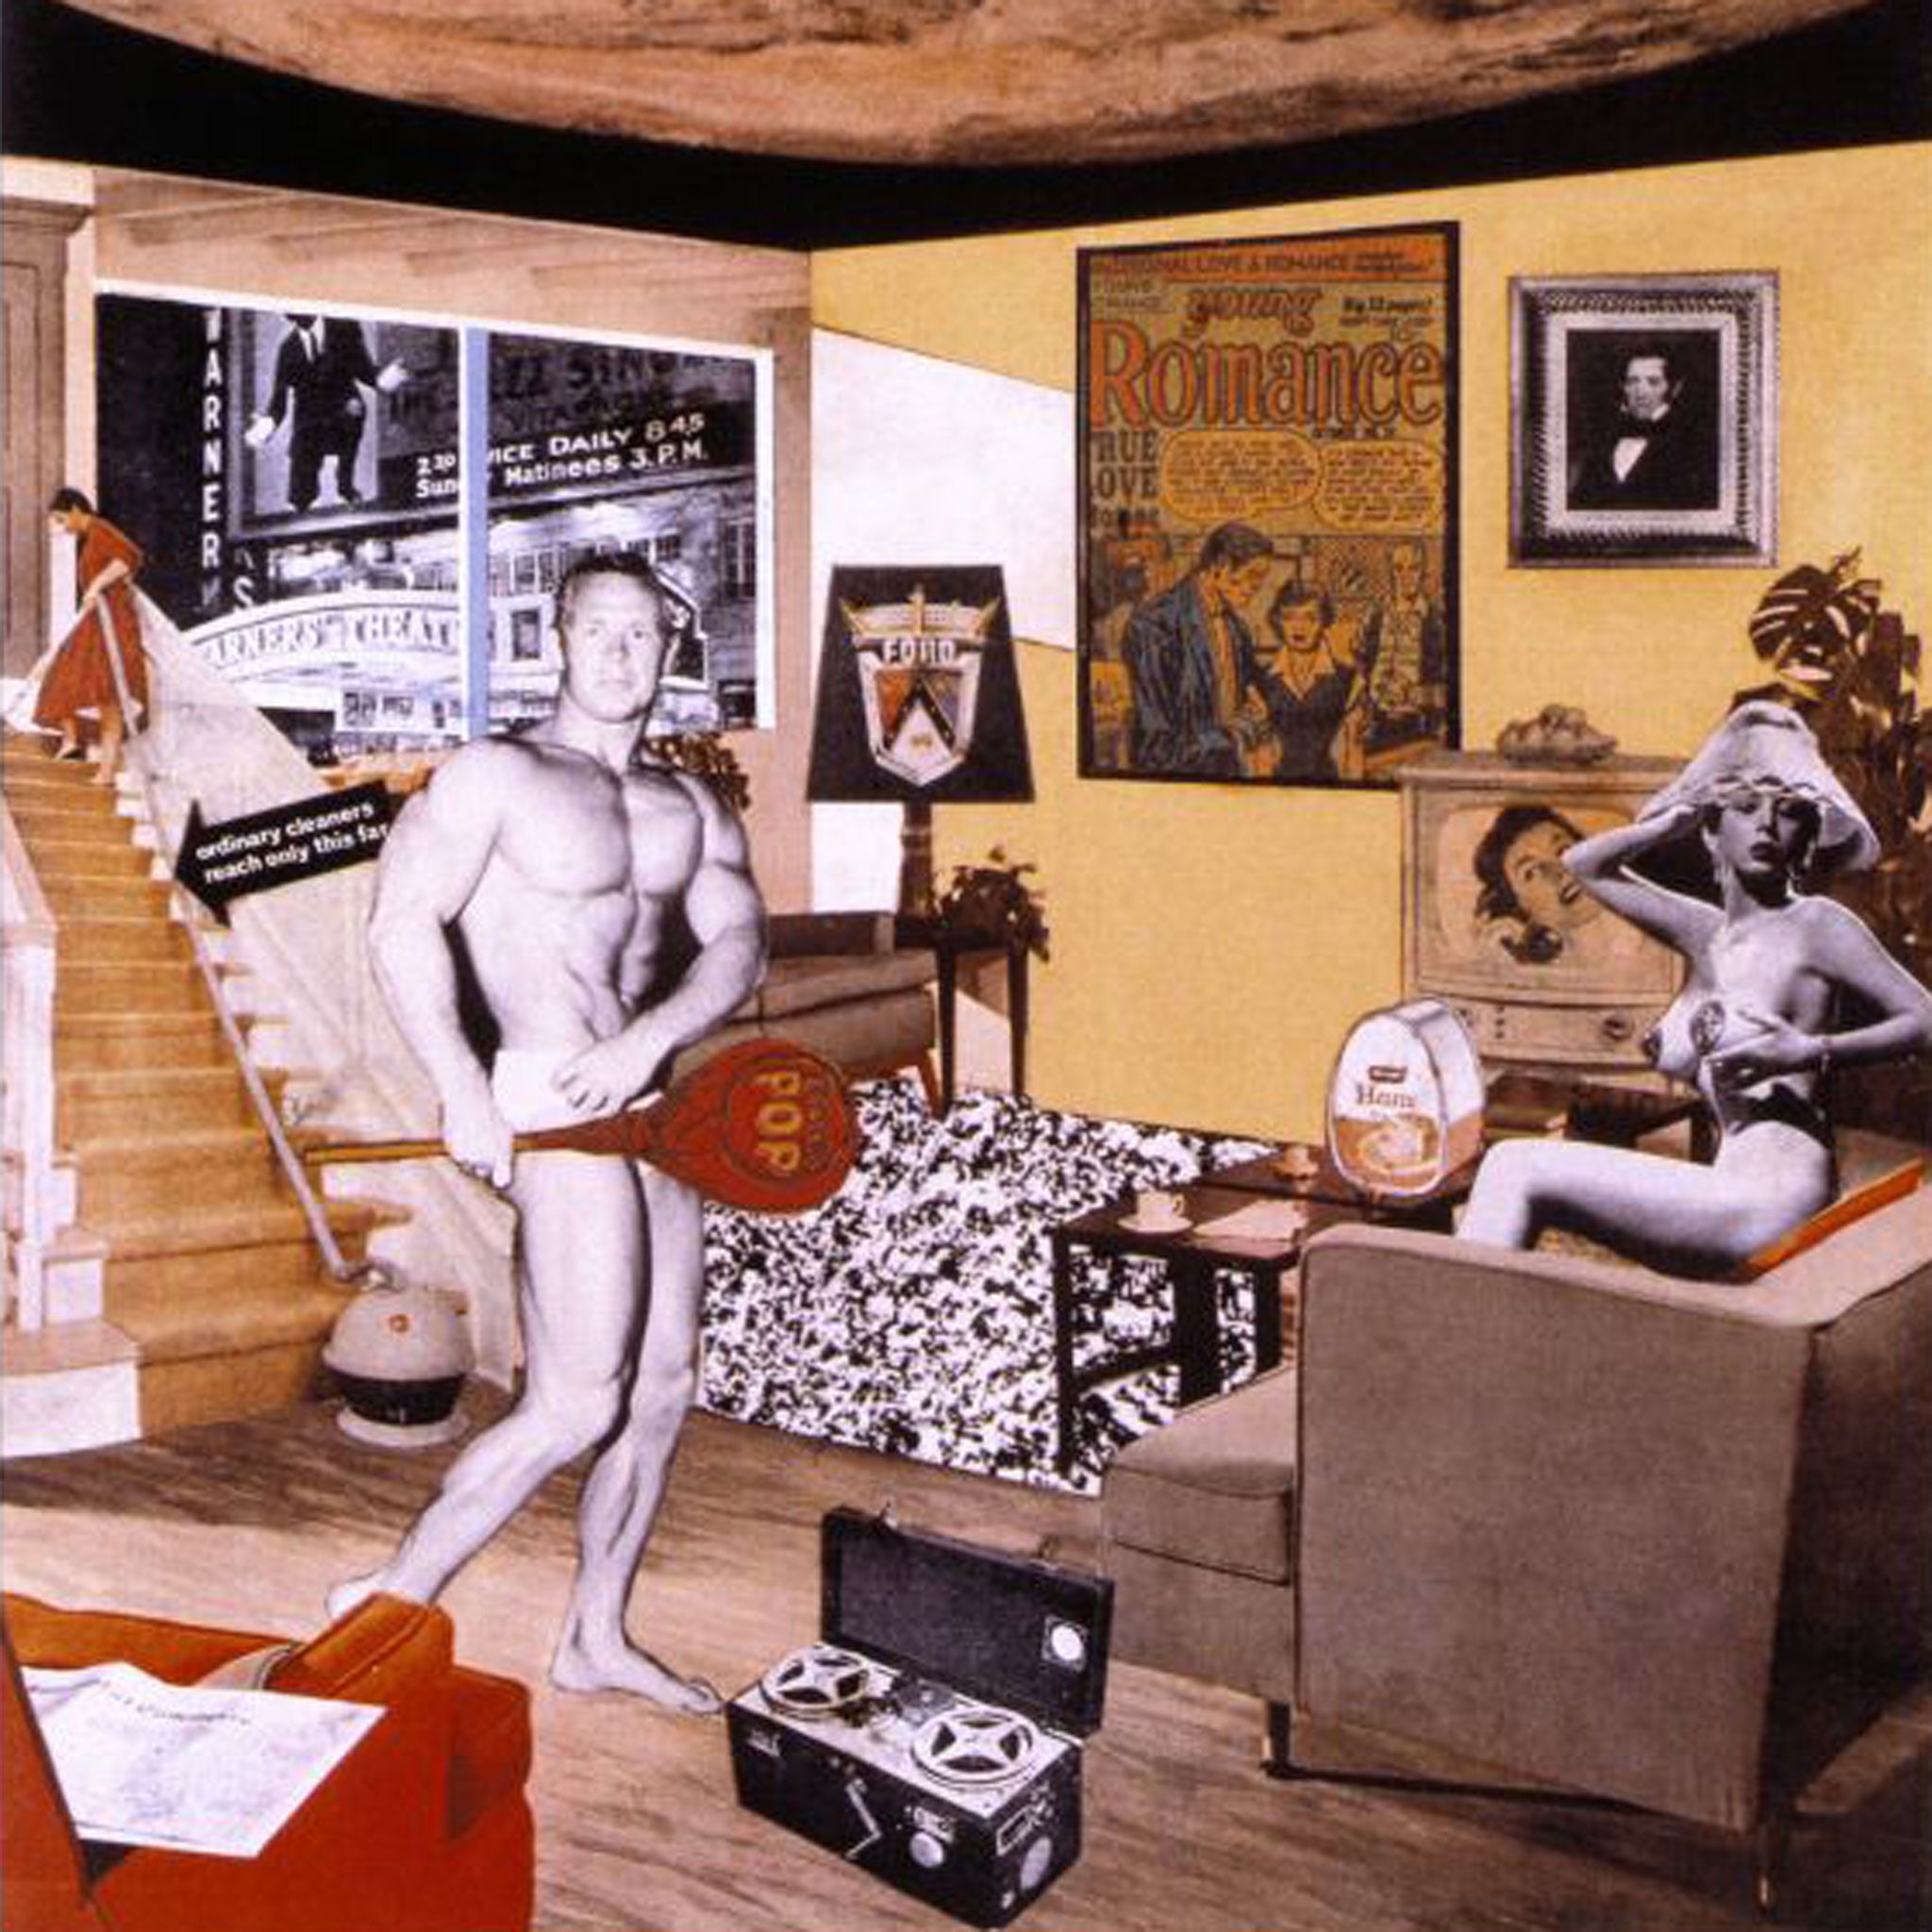 Richard Hamilton: The most influential artist of his generation ...